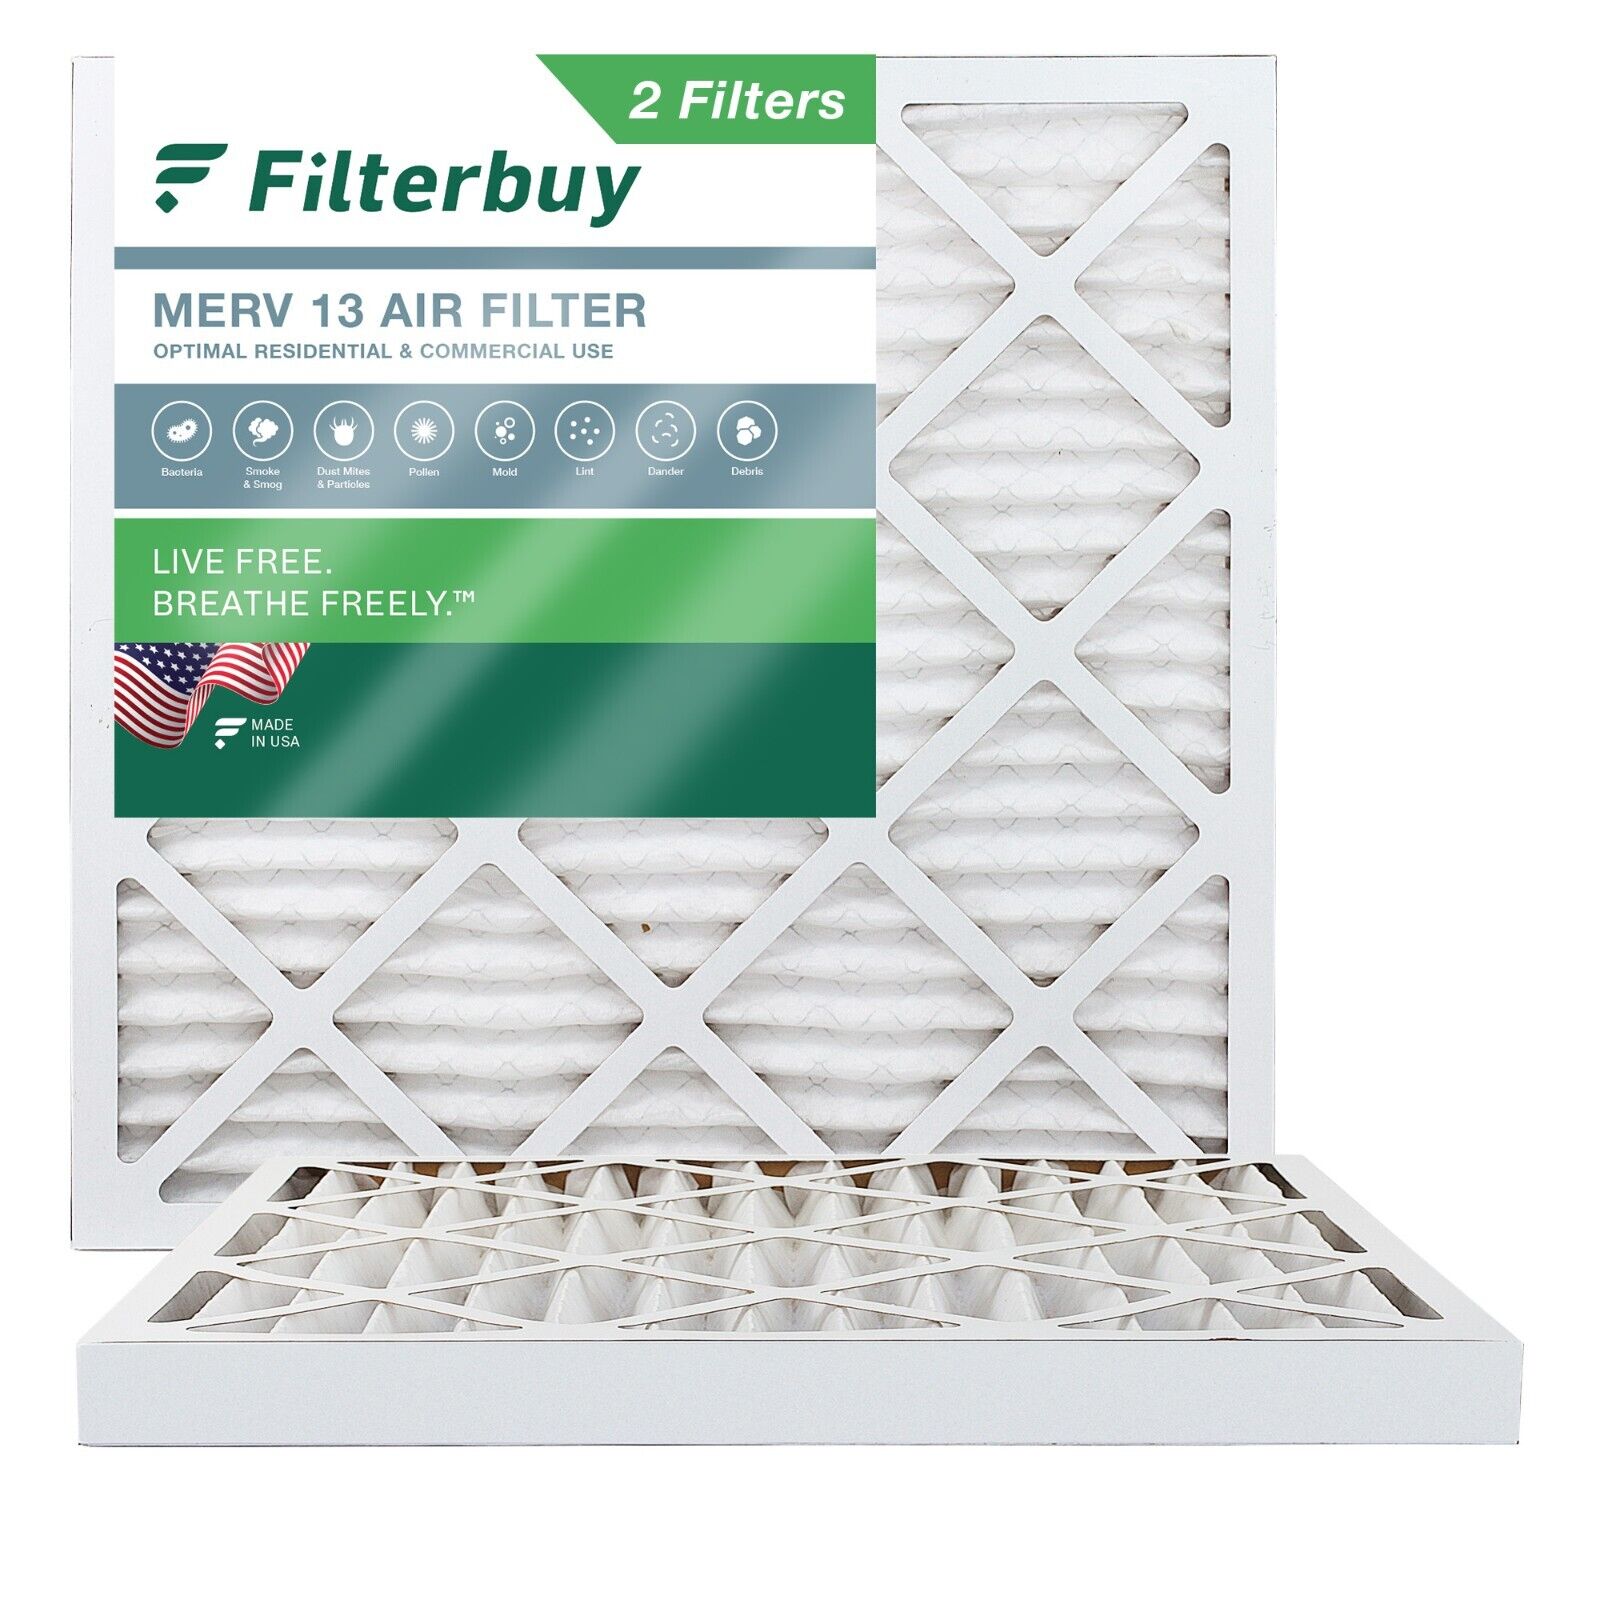 Filterbuy 24x24x2 Pleated Air Filters, Replacement for HVAC AC Furnace (MERV 13)